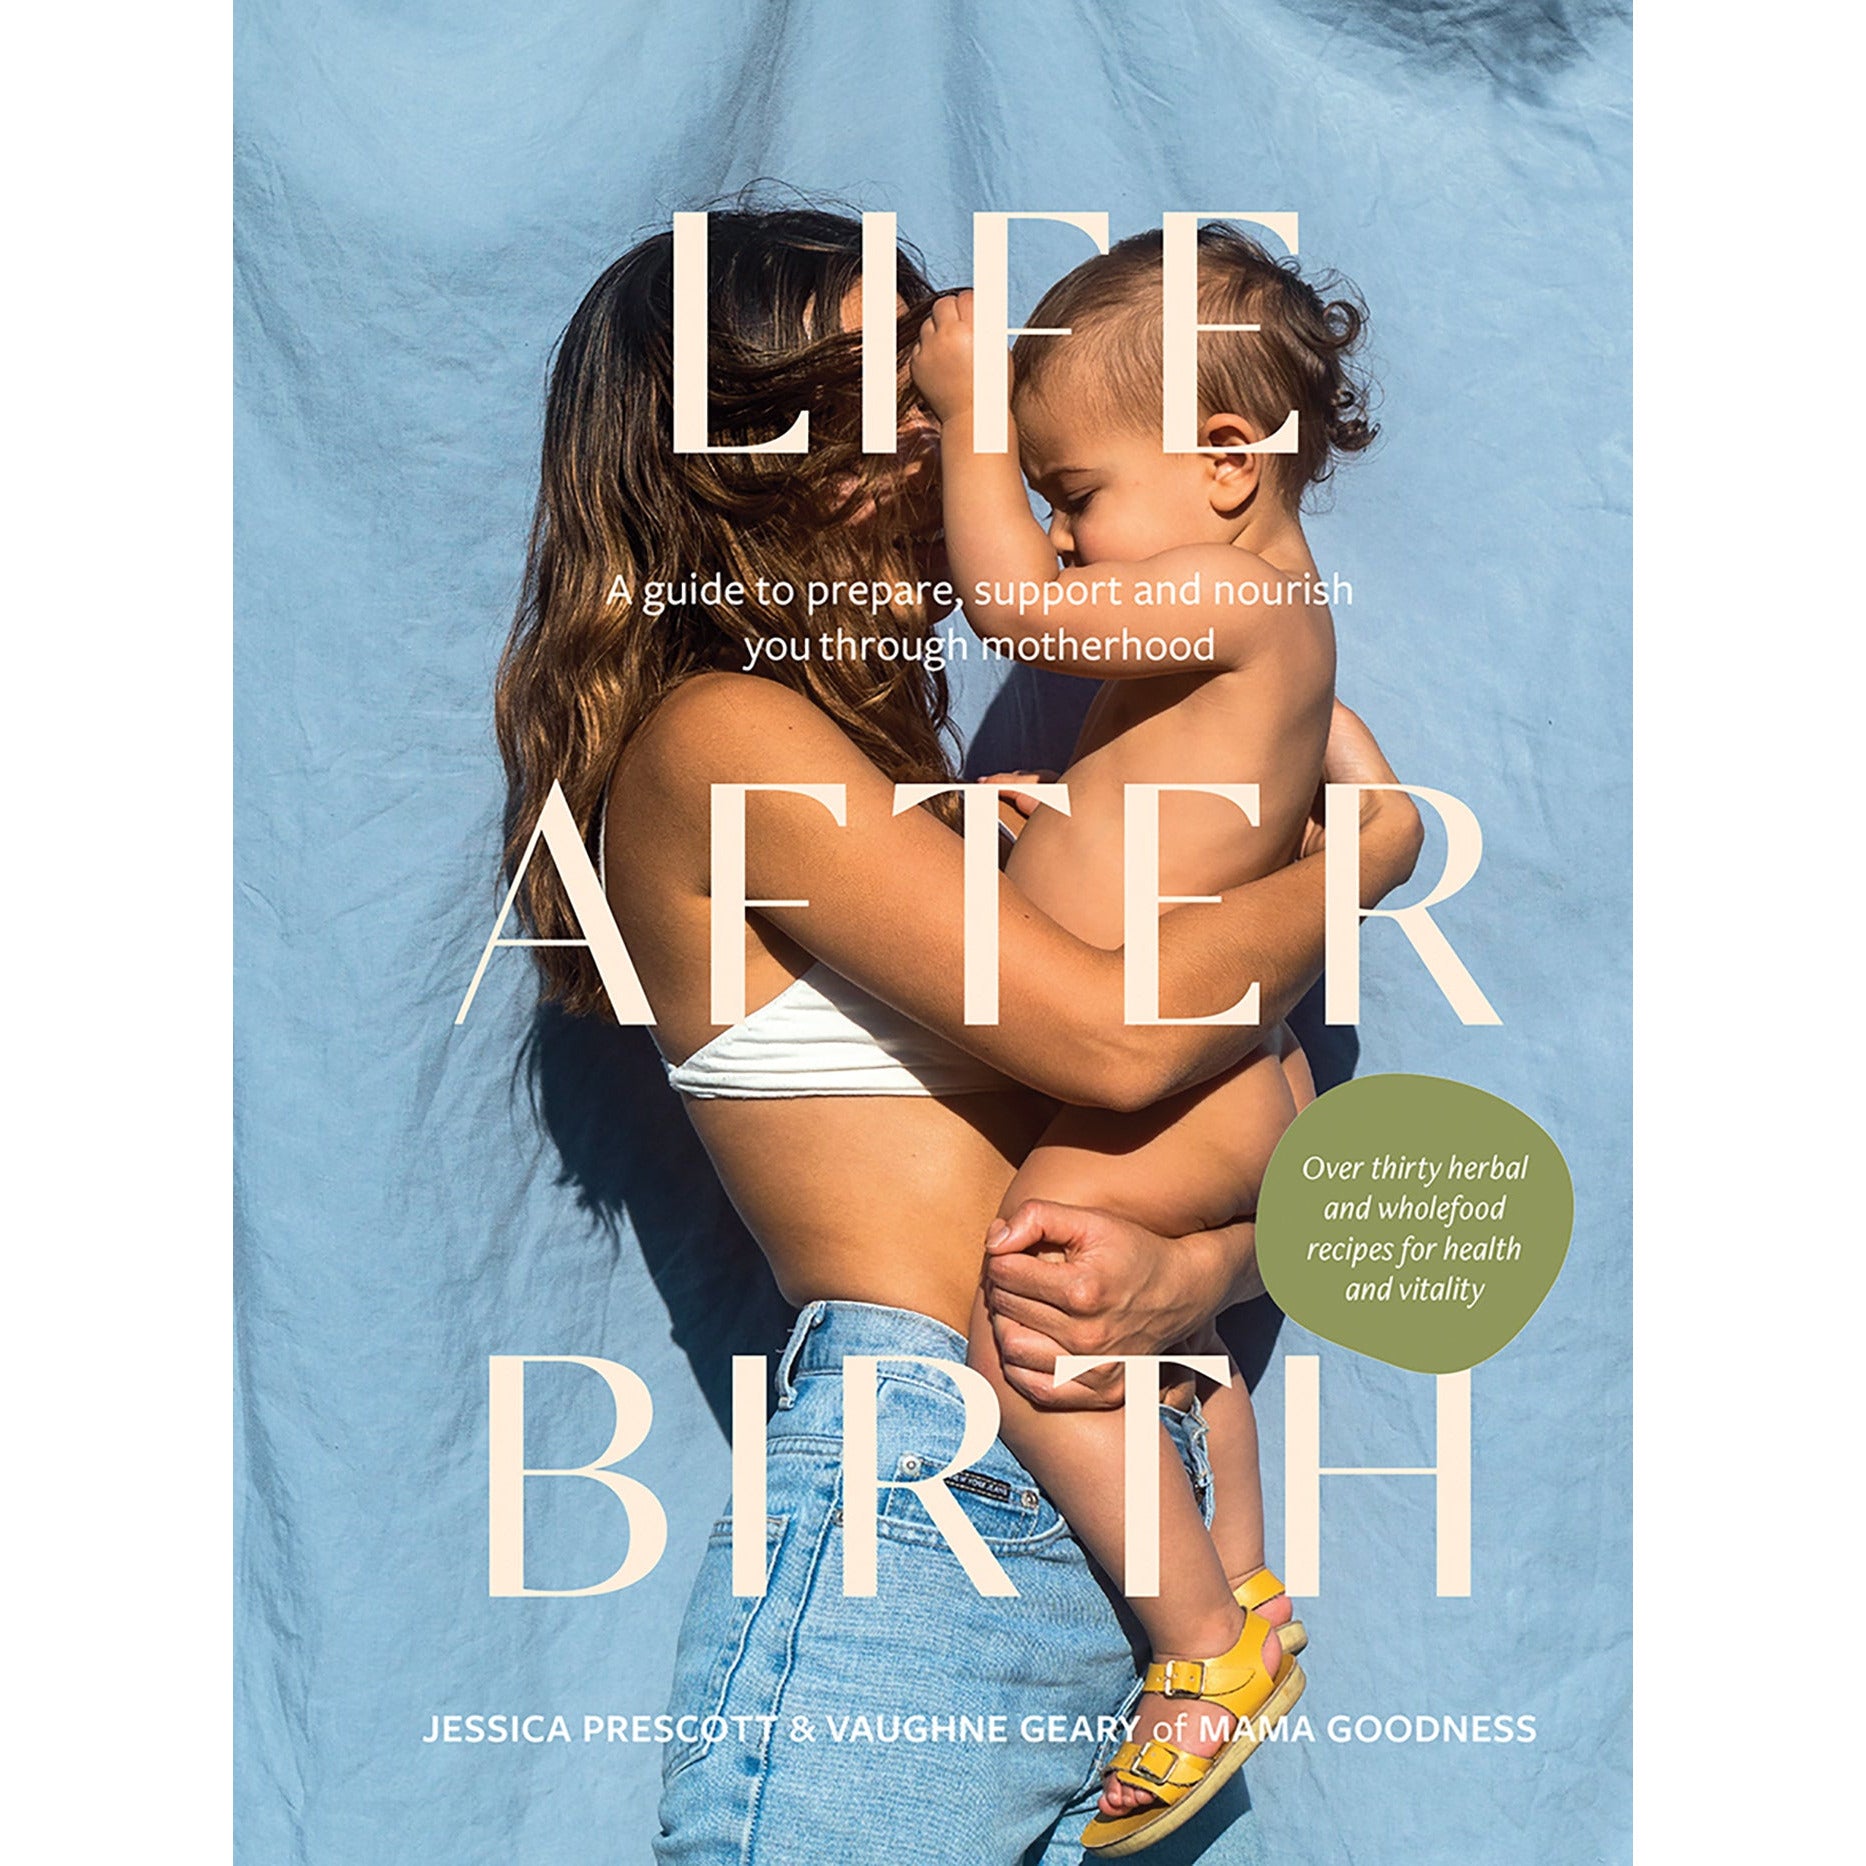 Life After Birth by Jessica Prescott & Vaghne Geary